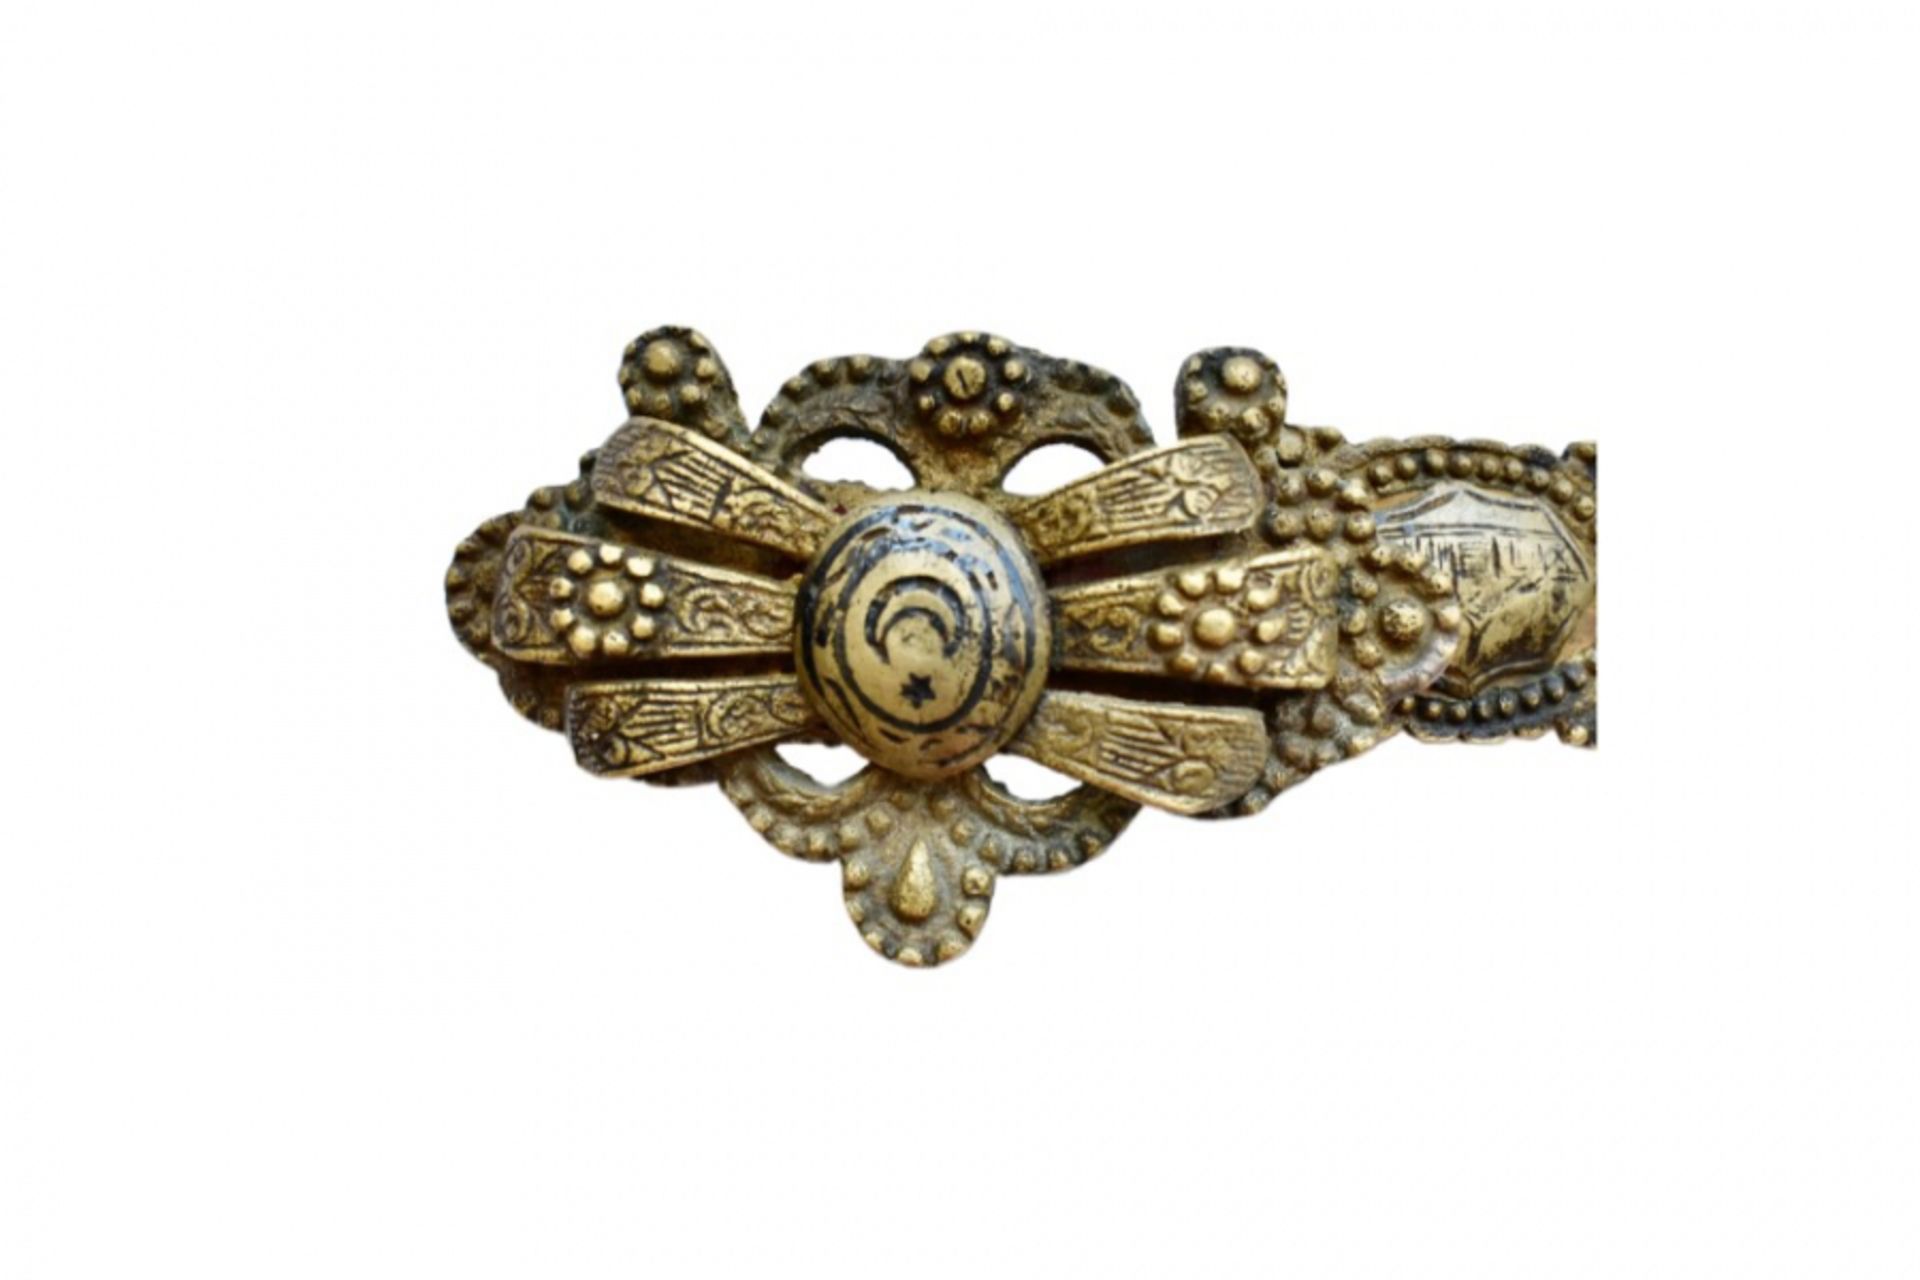 Ottoman period Constitutional bridal belt - Image 4 of 5